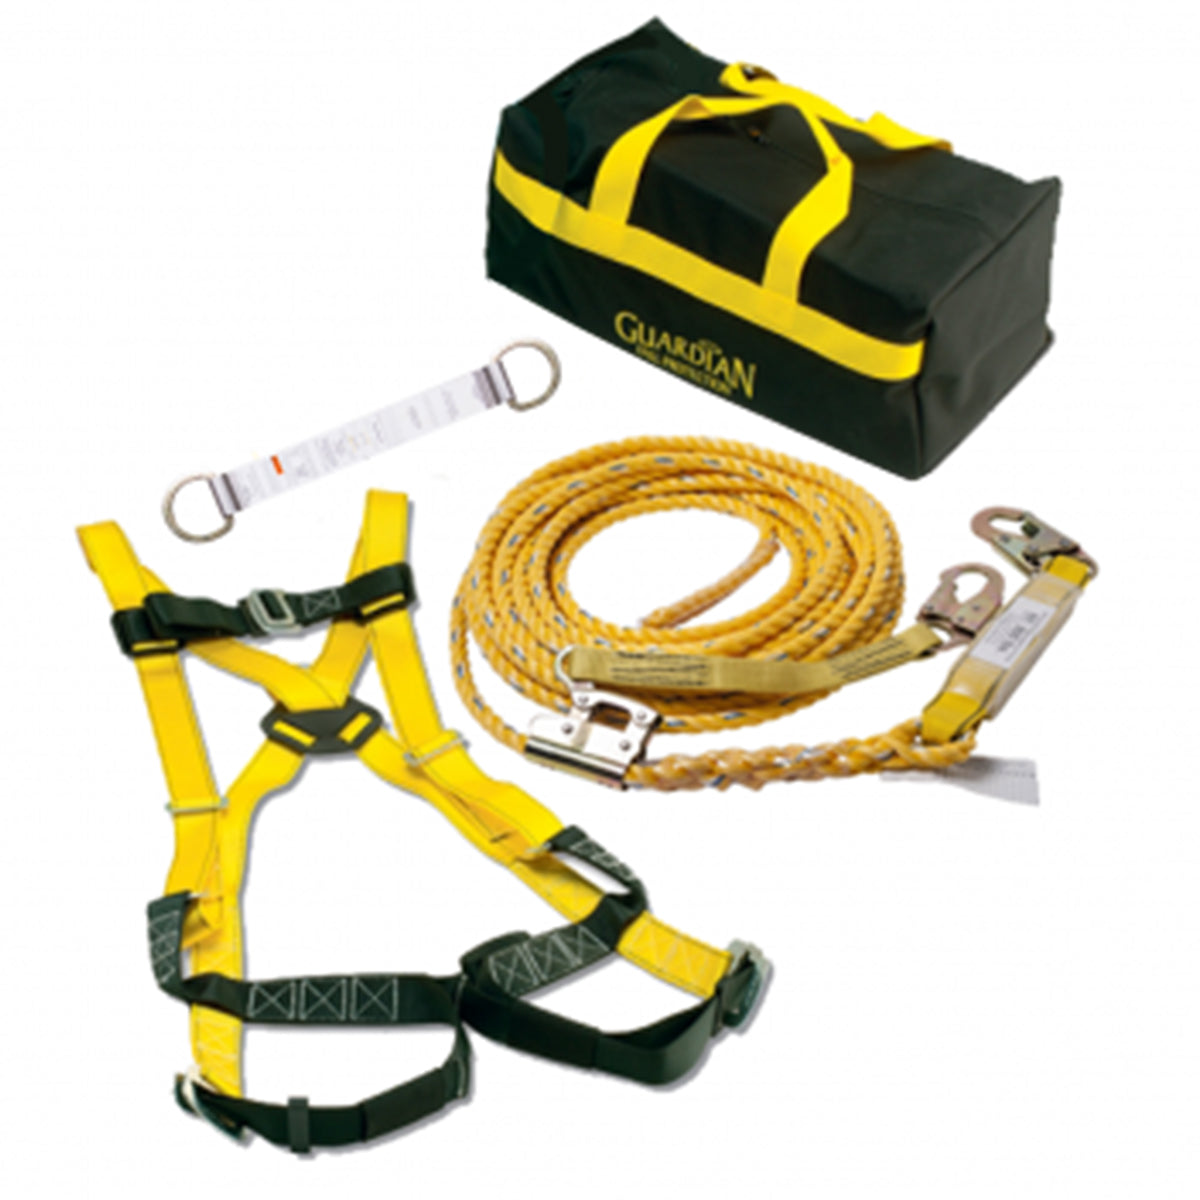 Guardian Fall Protection 99-11-0003 Sack of Safety HUV Harness and SOS Backpack